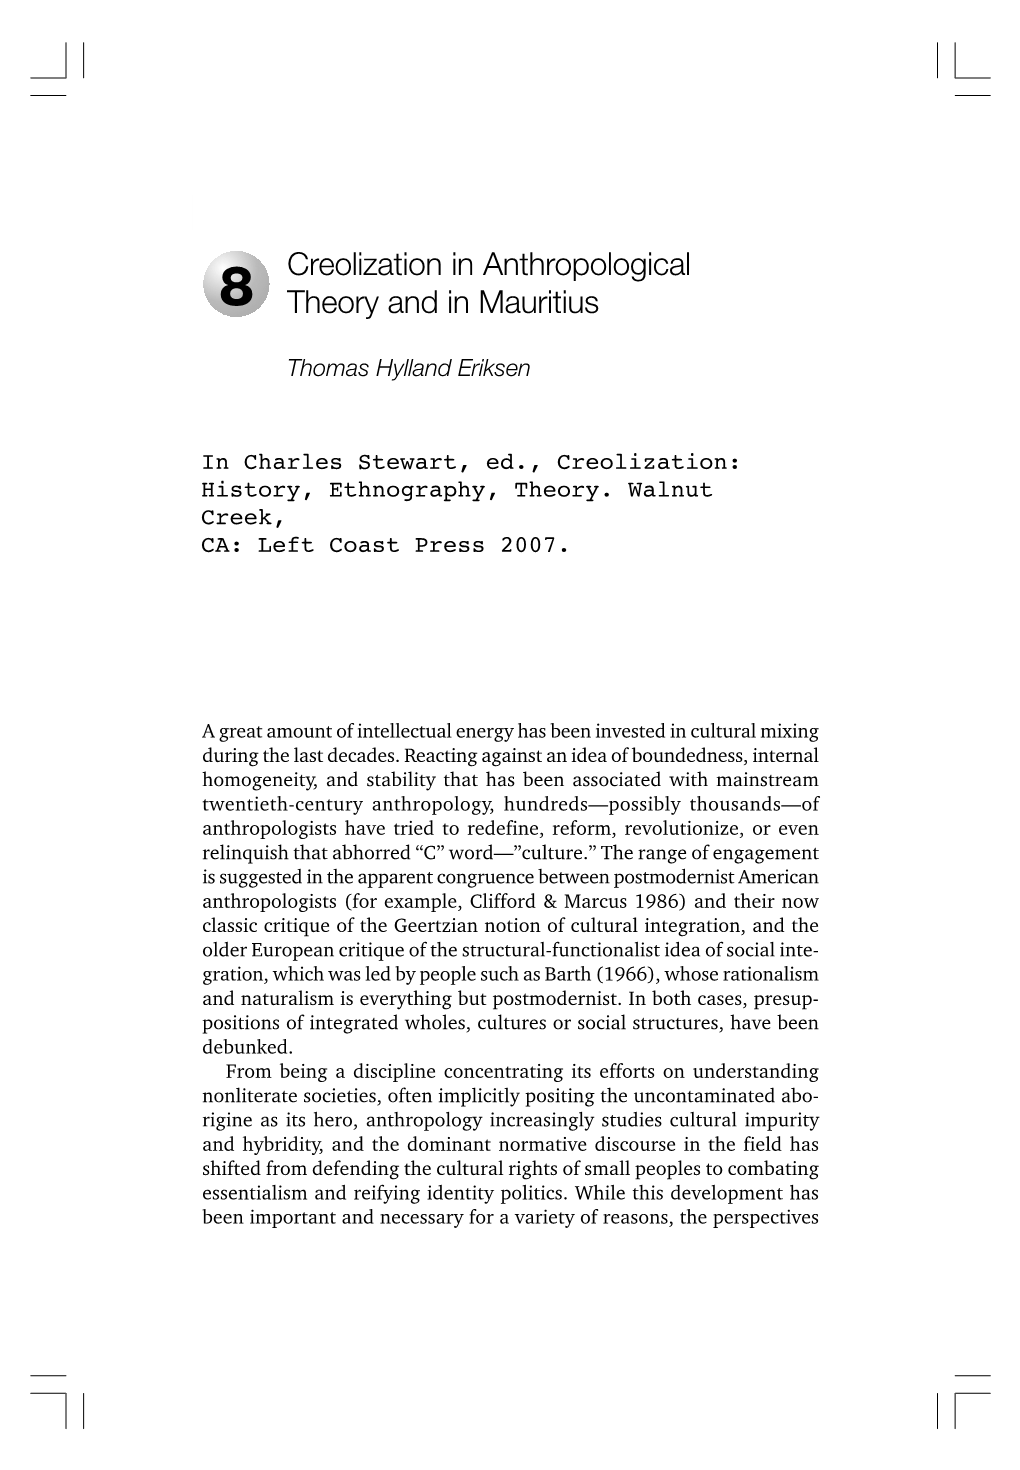 Creolization in Anthropological Theory and in Mauritius